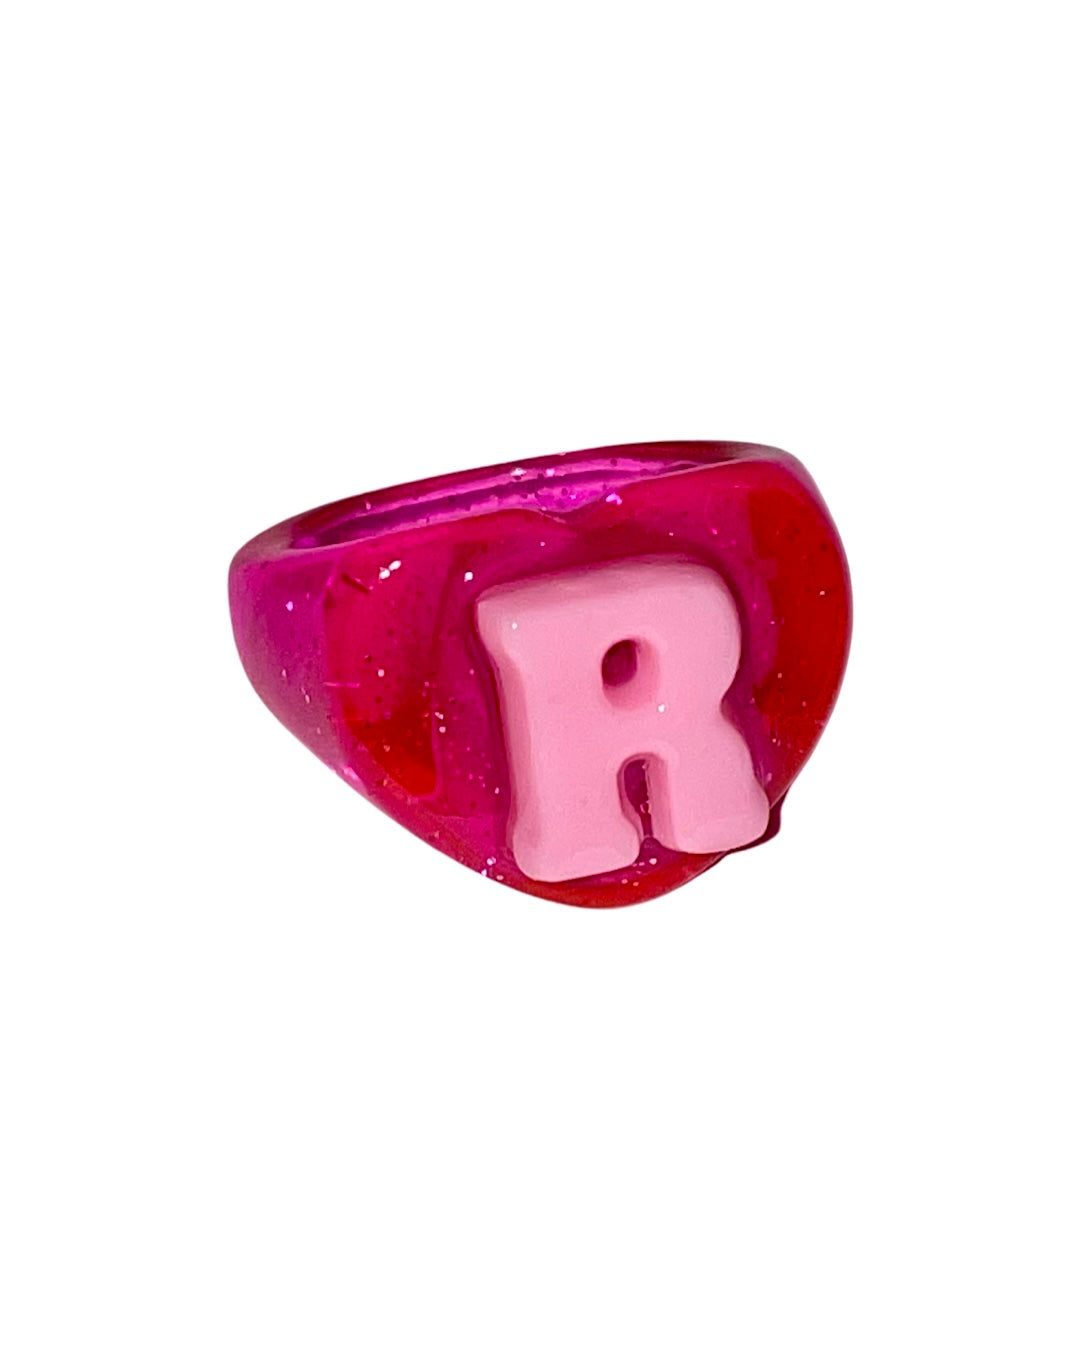 CHOOSE YOUR INITIAL: SIZE 5/6 HOT PINK GLITTER LUCKY RING